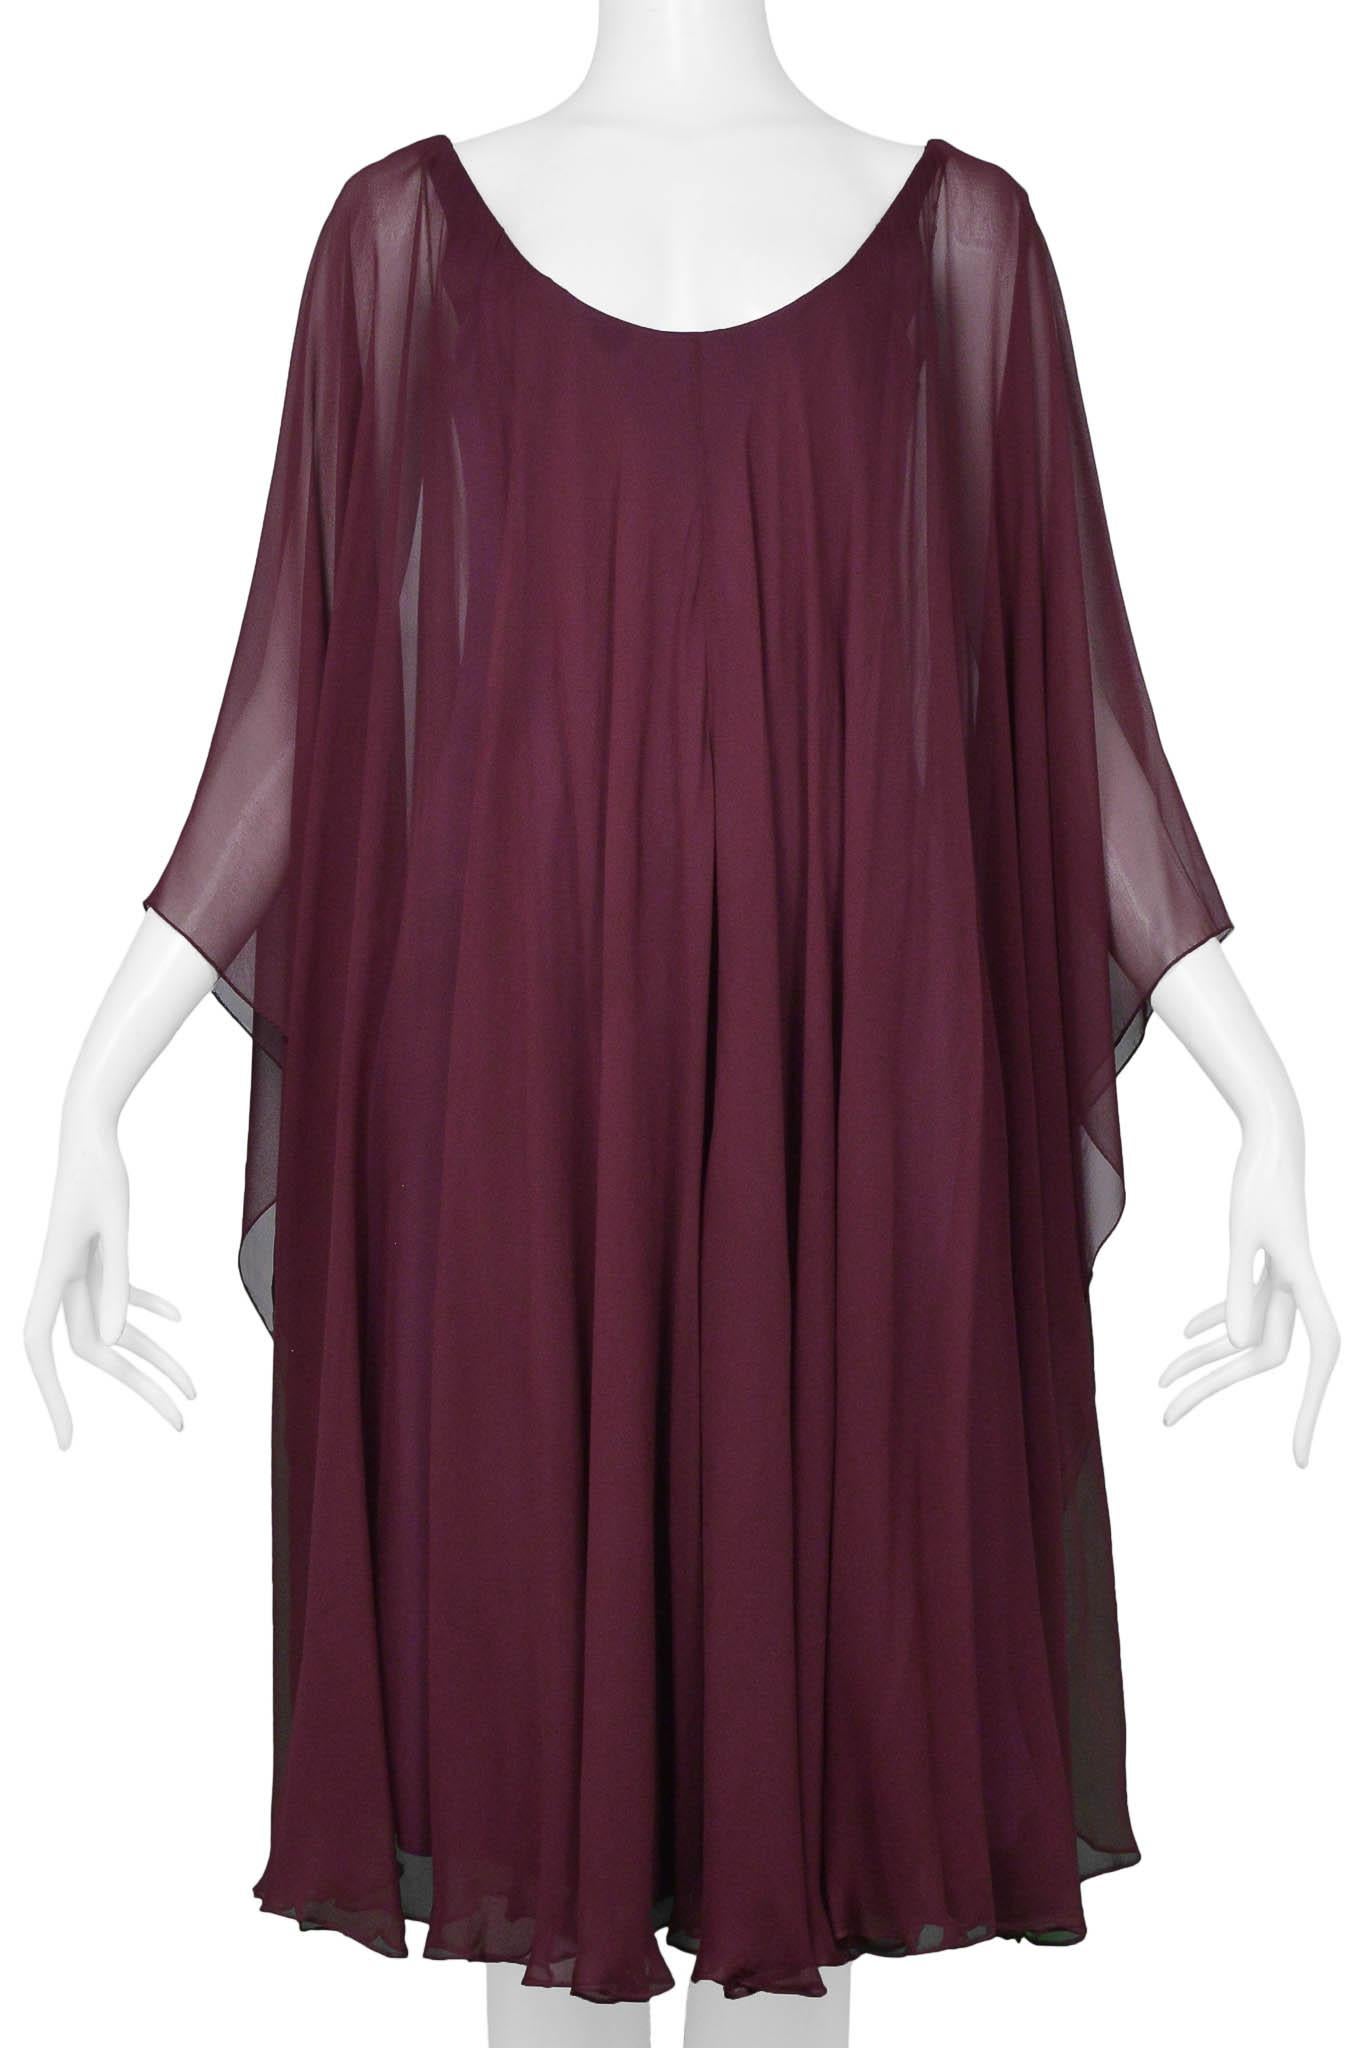 Halston Purple Chiffon & Jersey Dress In Excellent Condition For Sale In Los Angeles, CA